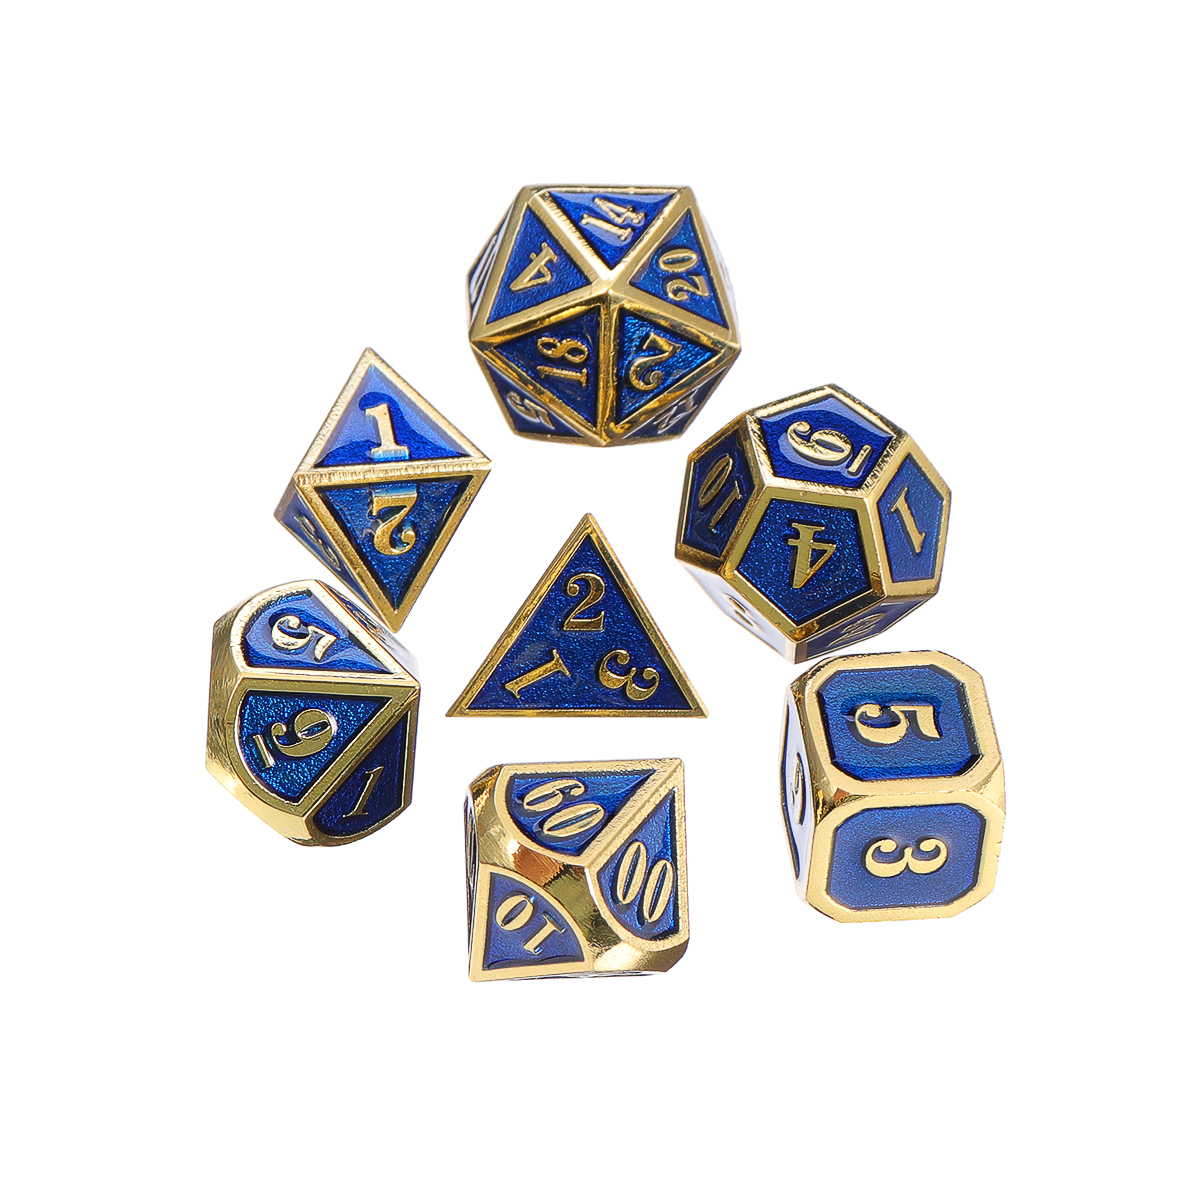 7Pcs-Heavy-Duty-Metal-Polyhedral-Dices-Set-Multisided-Dice-Antique-RPG-Role-Playing-Game-Dices-1371263-4